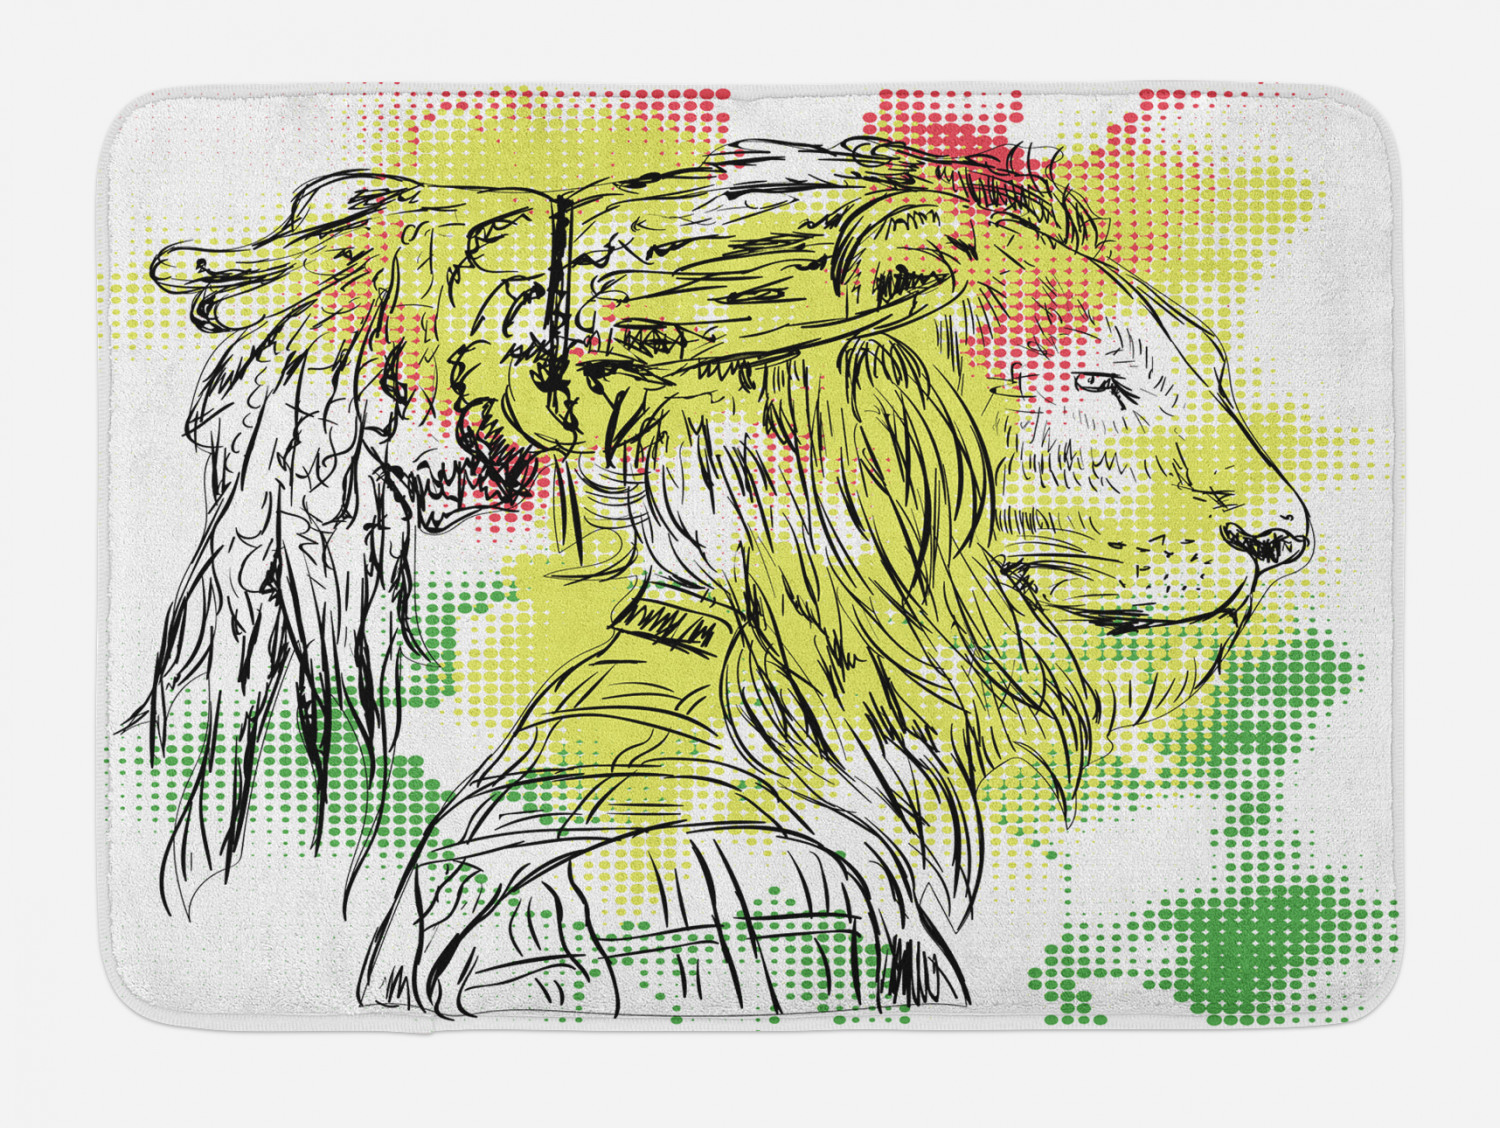 Rasta Bath Mat, Black and White Sketchy Head of Lion on Digital Pixels Backdrop Image, Non-Slip Plush Mat Bathroom Kitchen Laundry Room Decor, 29.5 X 17.5 Inches, Green Burgundy and Yellow, Ambesonne - image 1 of 2